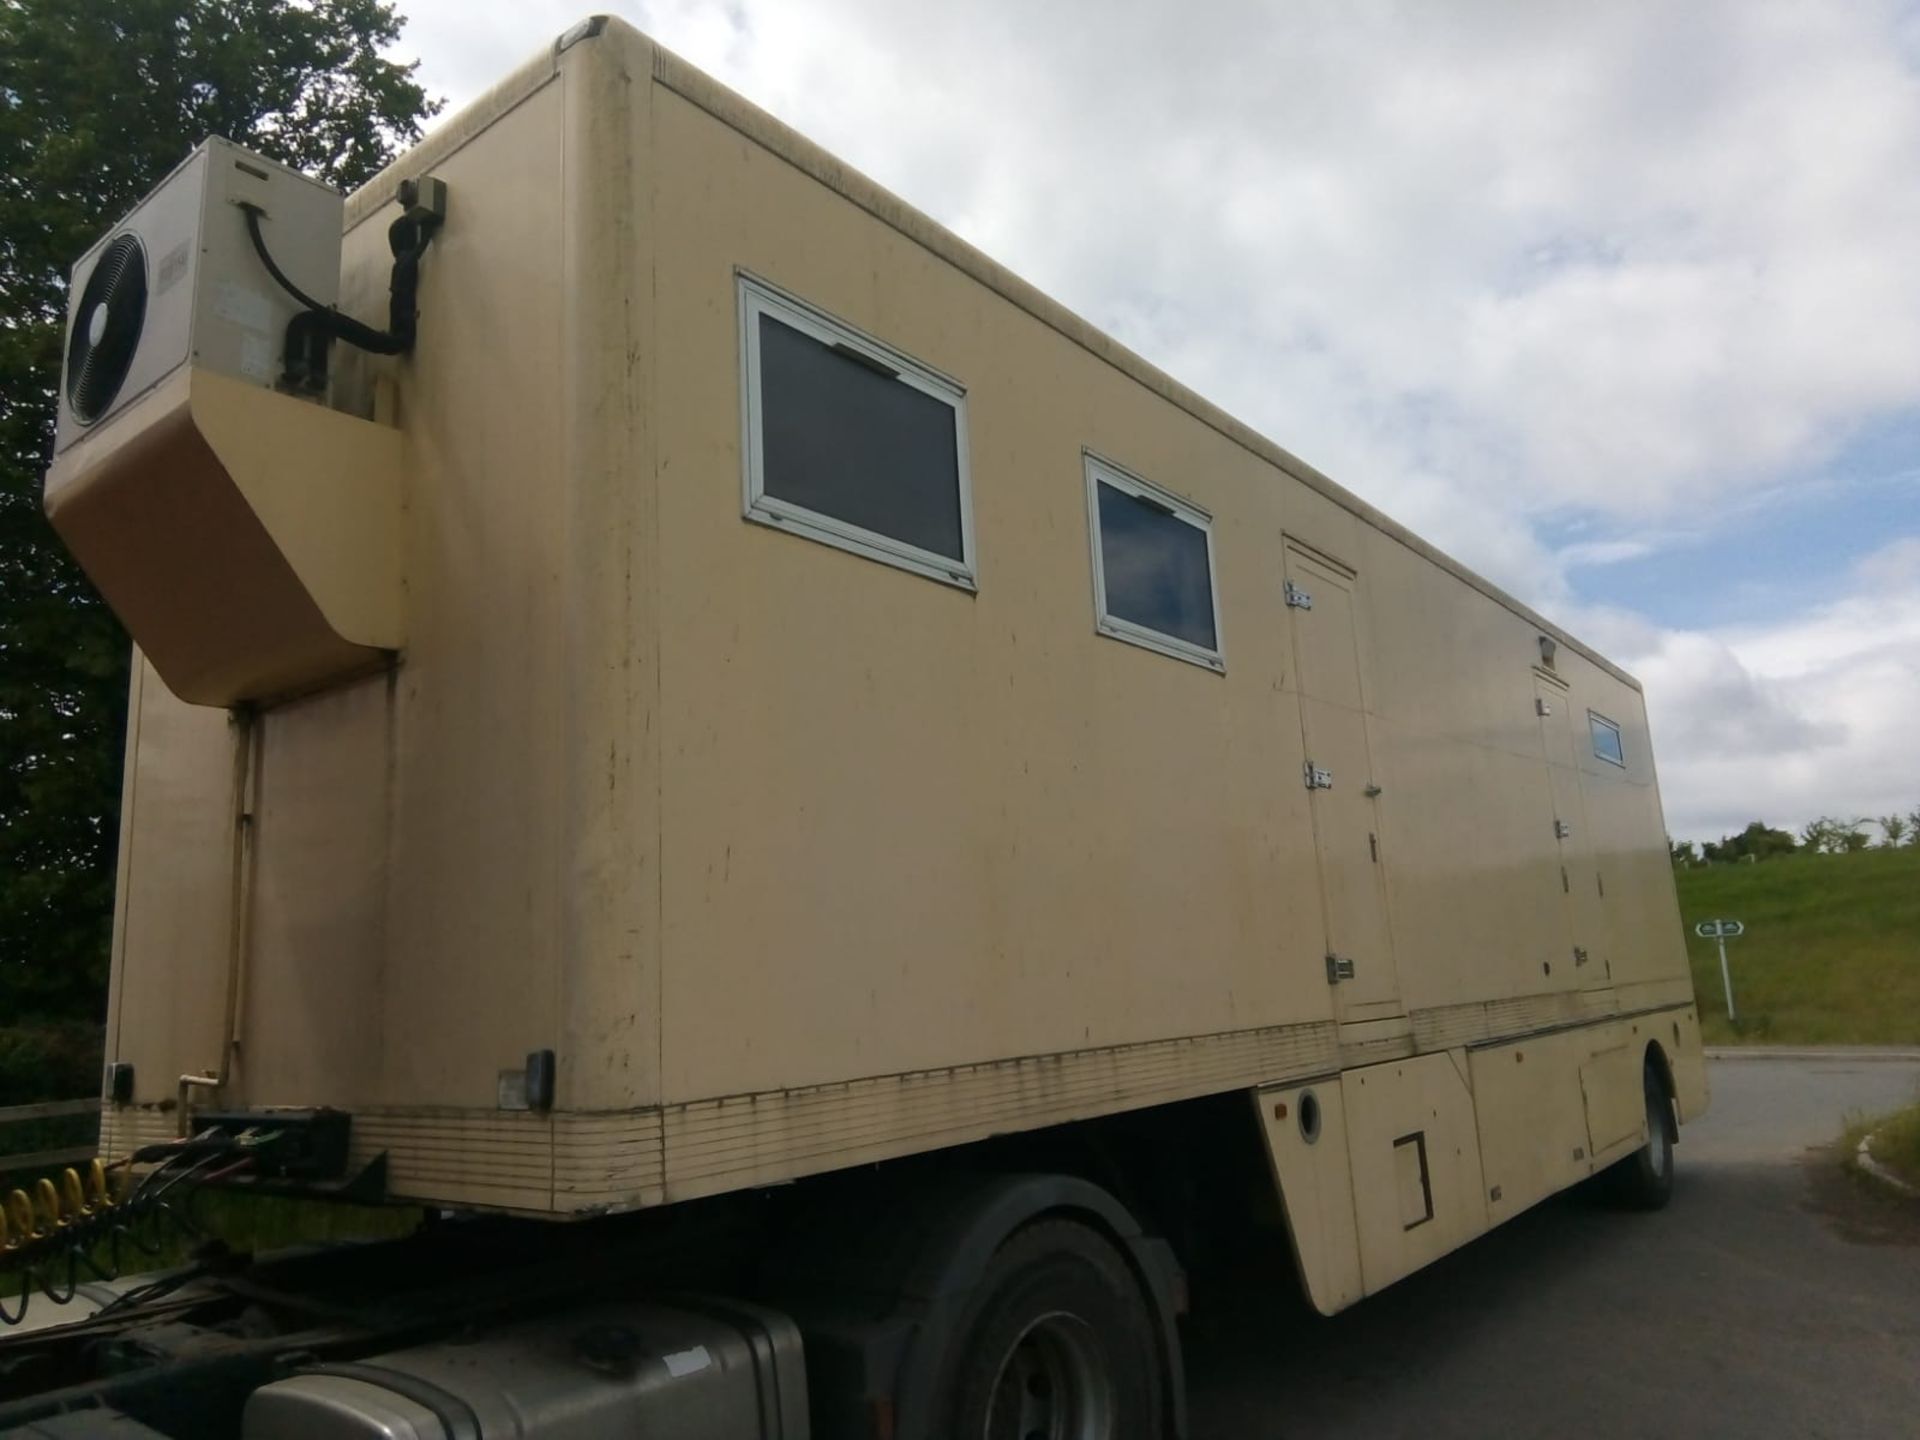 1999 SDC 10M MEDICAL / LIVING TRAILER. FITTED WITH QDD4500SL BONE DENSITY X-RAY SCANNER *PLUS VAT* - Image 2 of 15